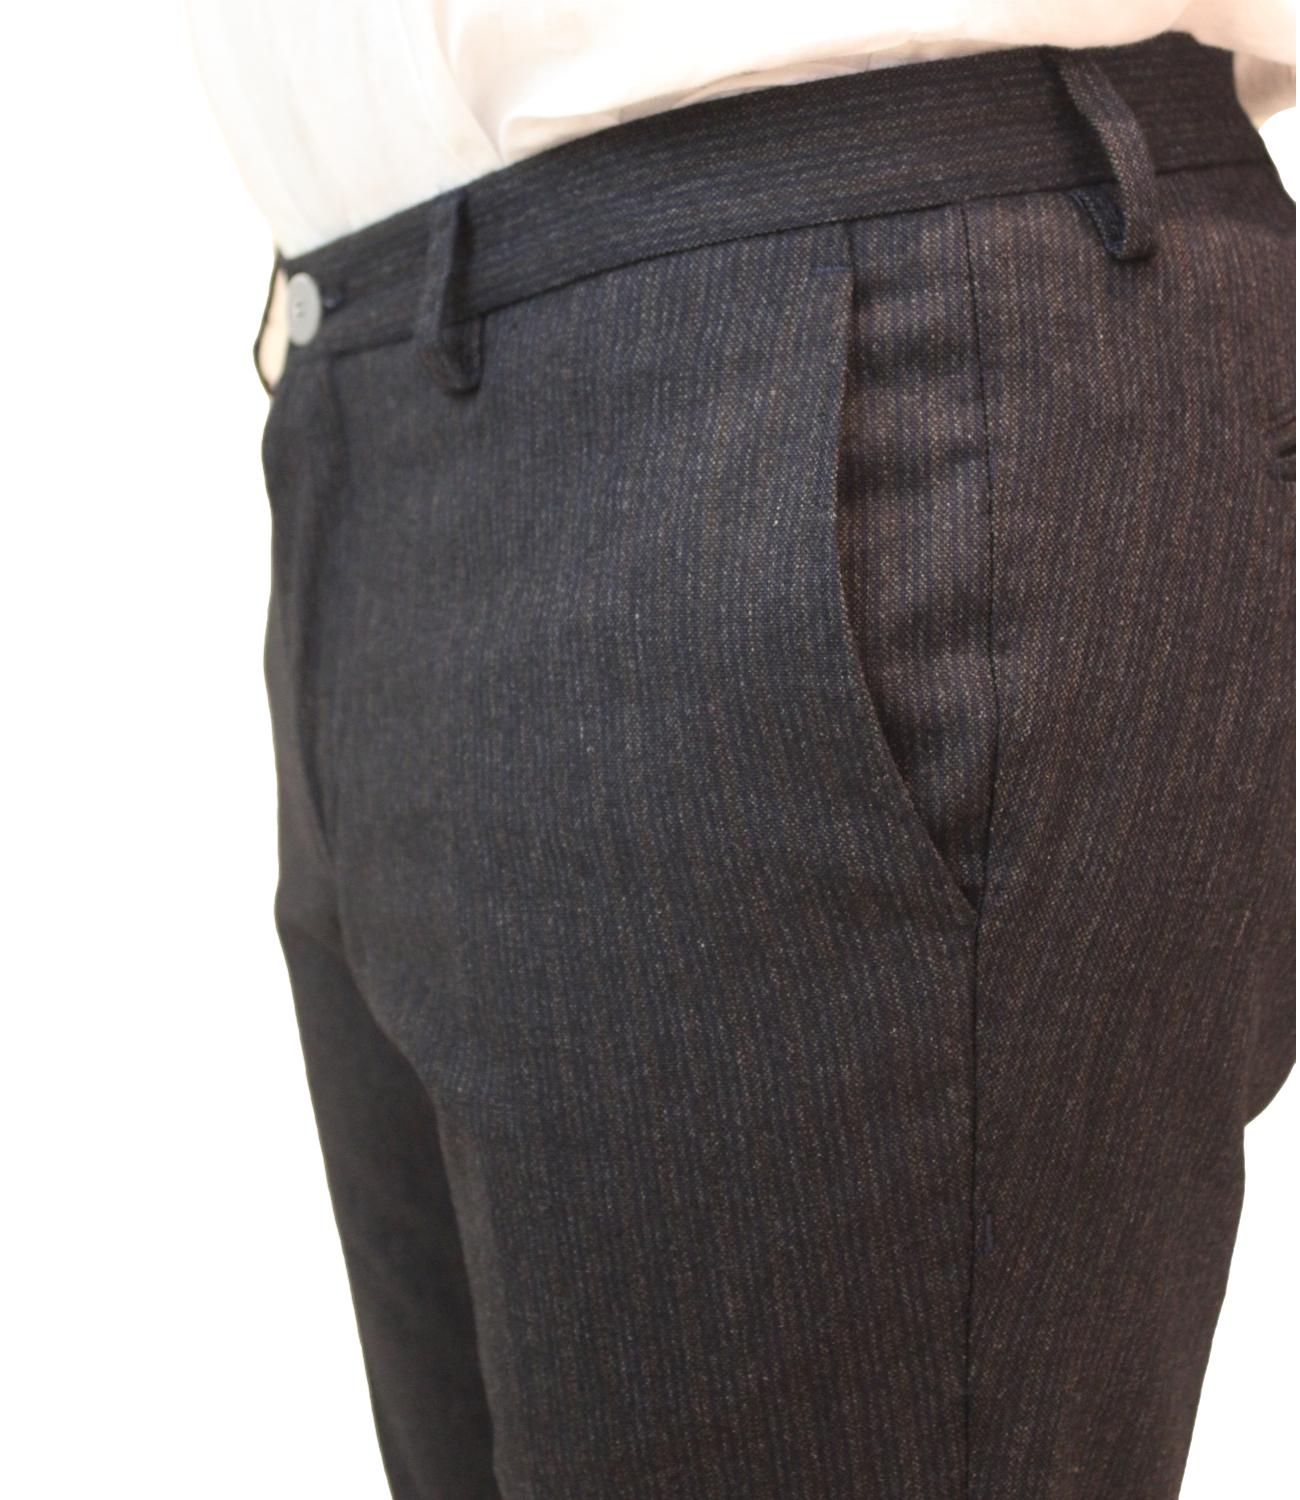 AT.P.CO Blue trousers with gray stripes for men